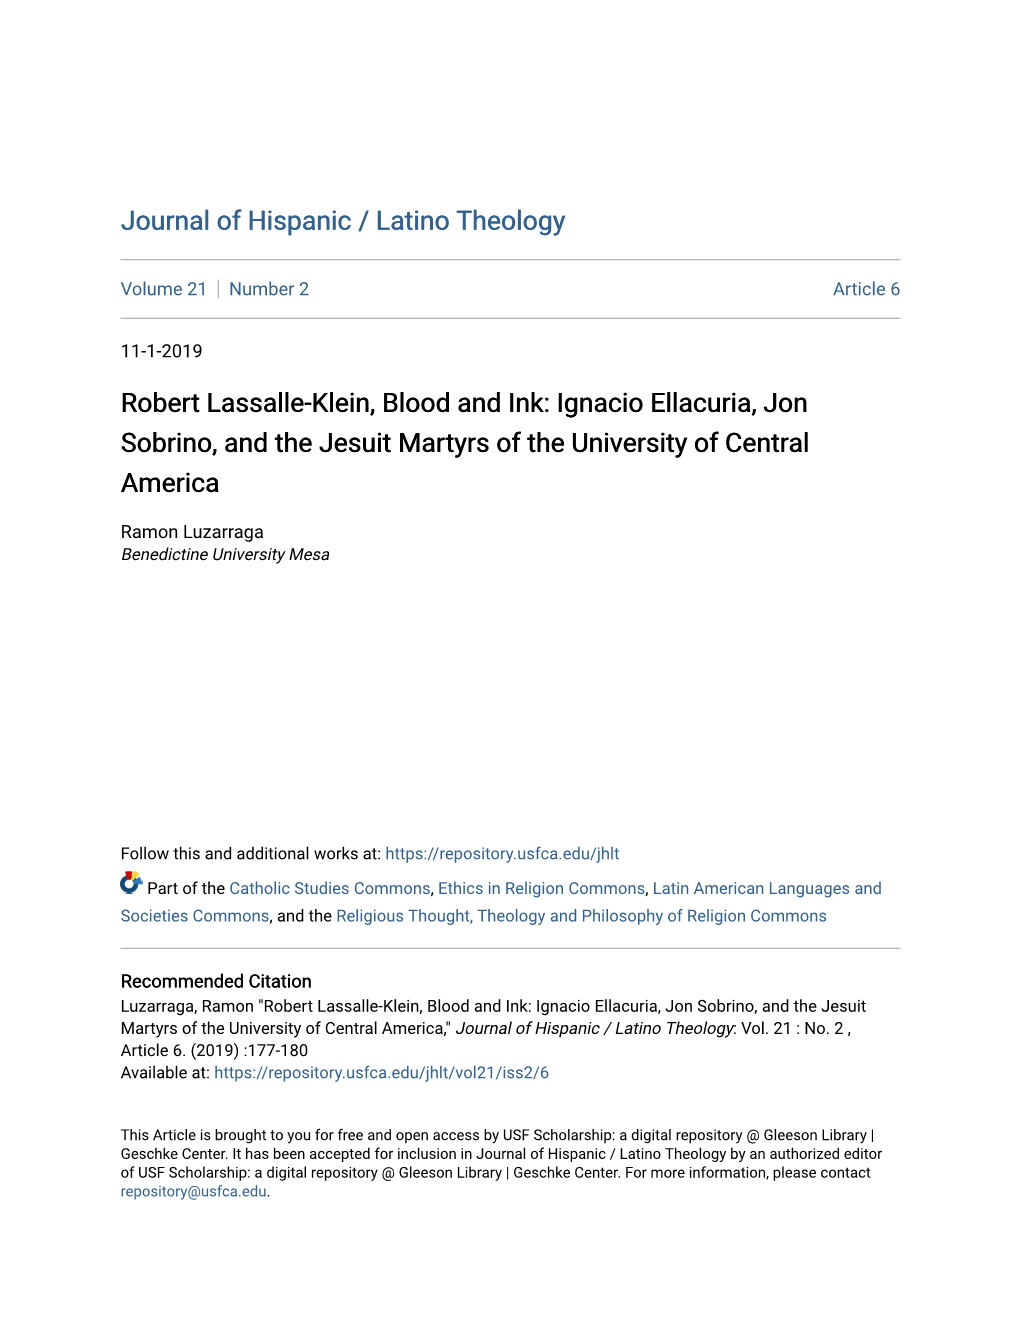 Robert Lassalle-Klein, Blood and Ink: Ignacio Ellacuria, Jon Sobrino, and the Jesuit Martyrs of the University of Central America